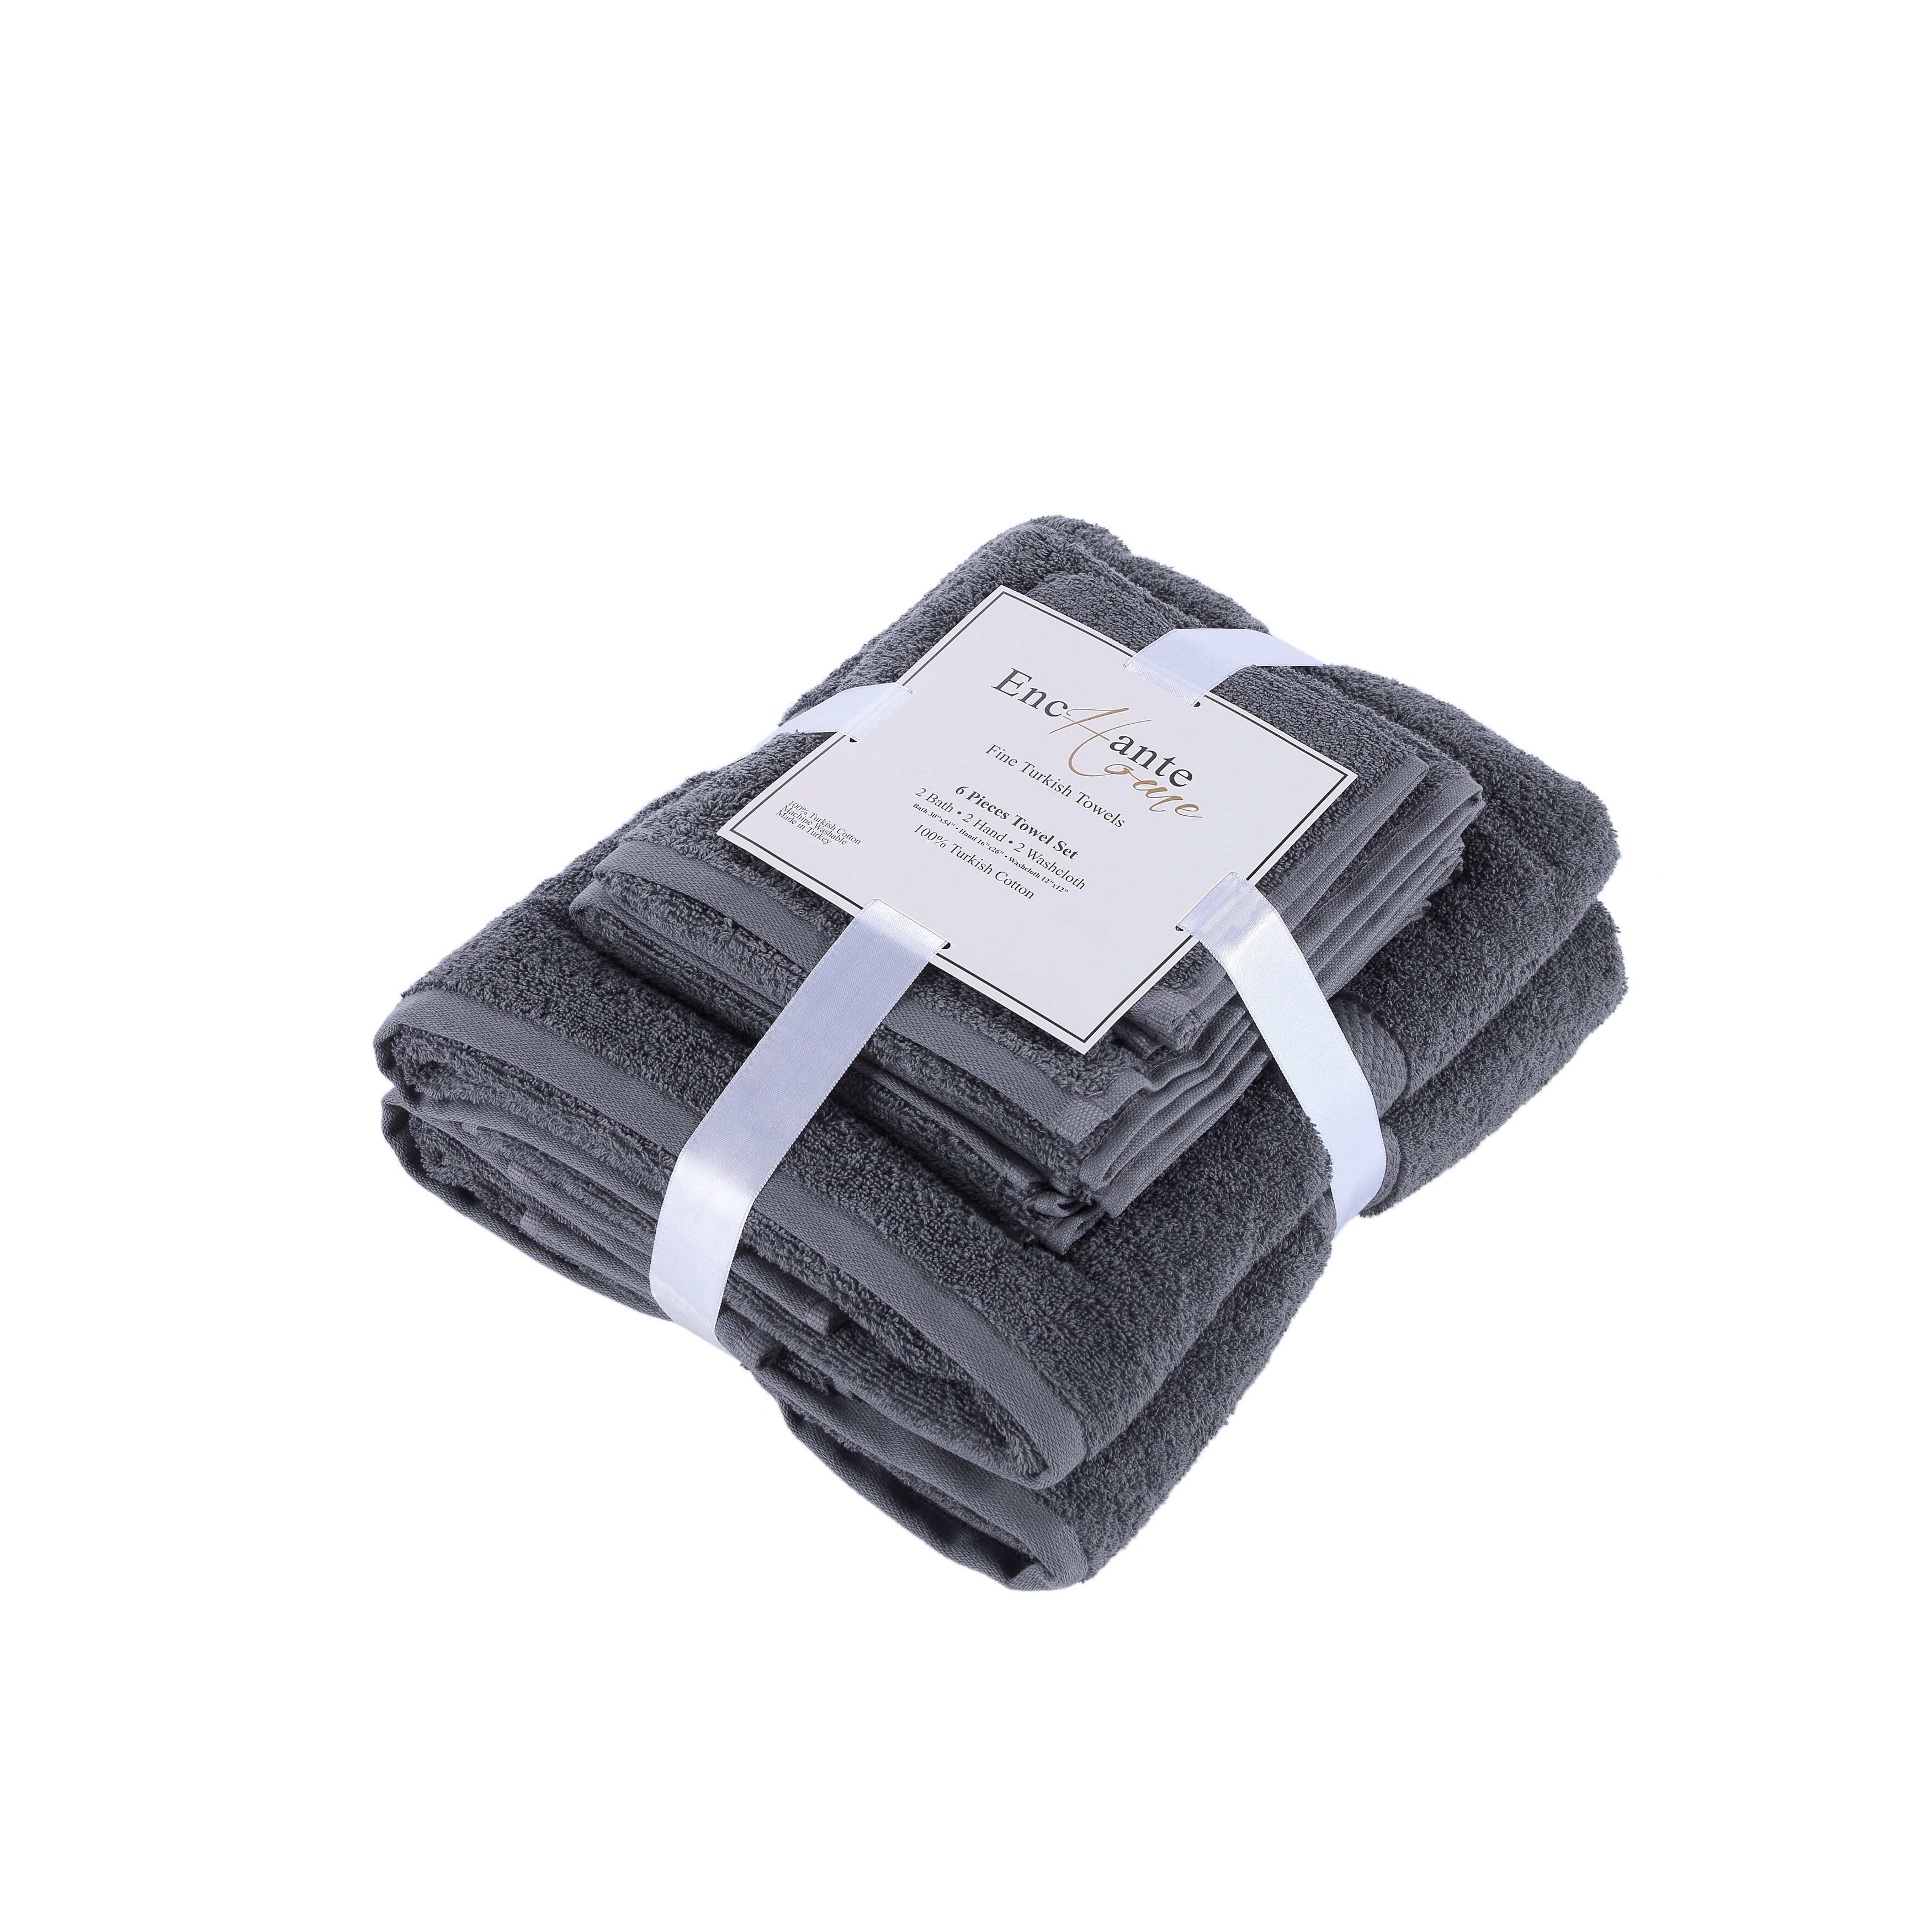 https://ak1.ostkcdn.com/images/products/is/images/direct/53542889c1b5fb358d5ac9b5bf6b9c25e814939a/Bomonti-Turkish-Towel-6-pc-set.jpg